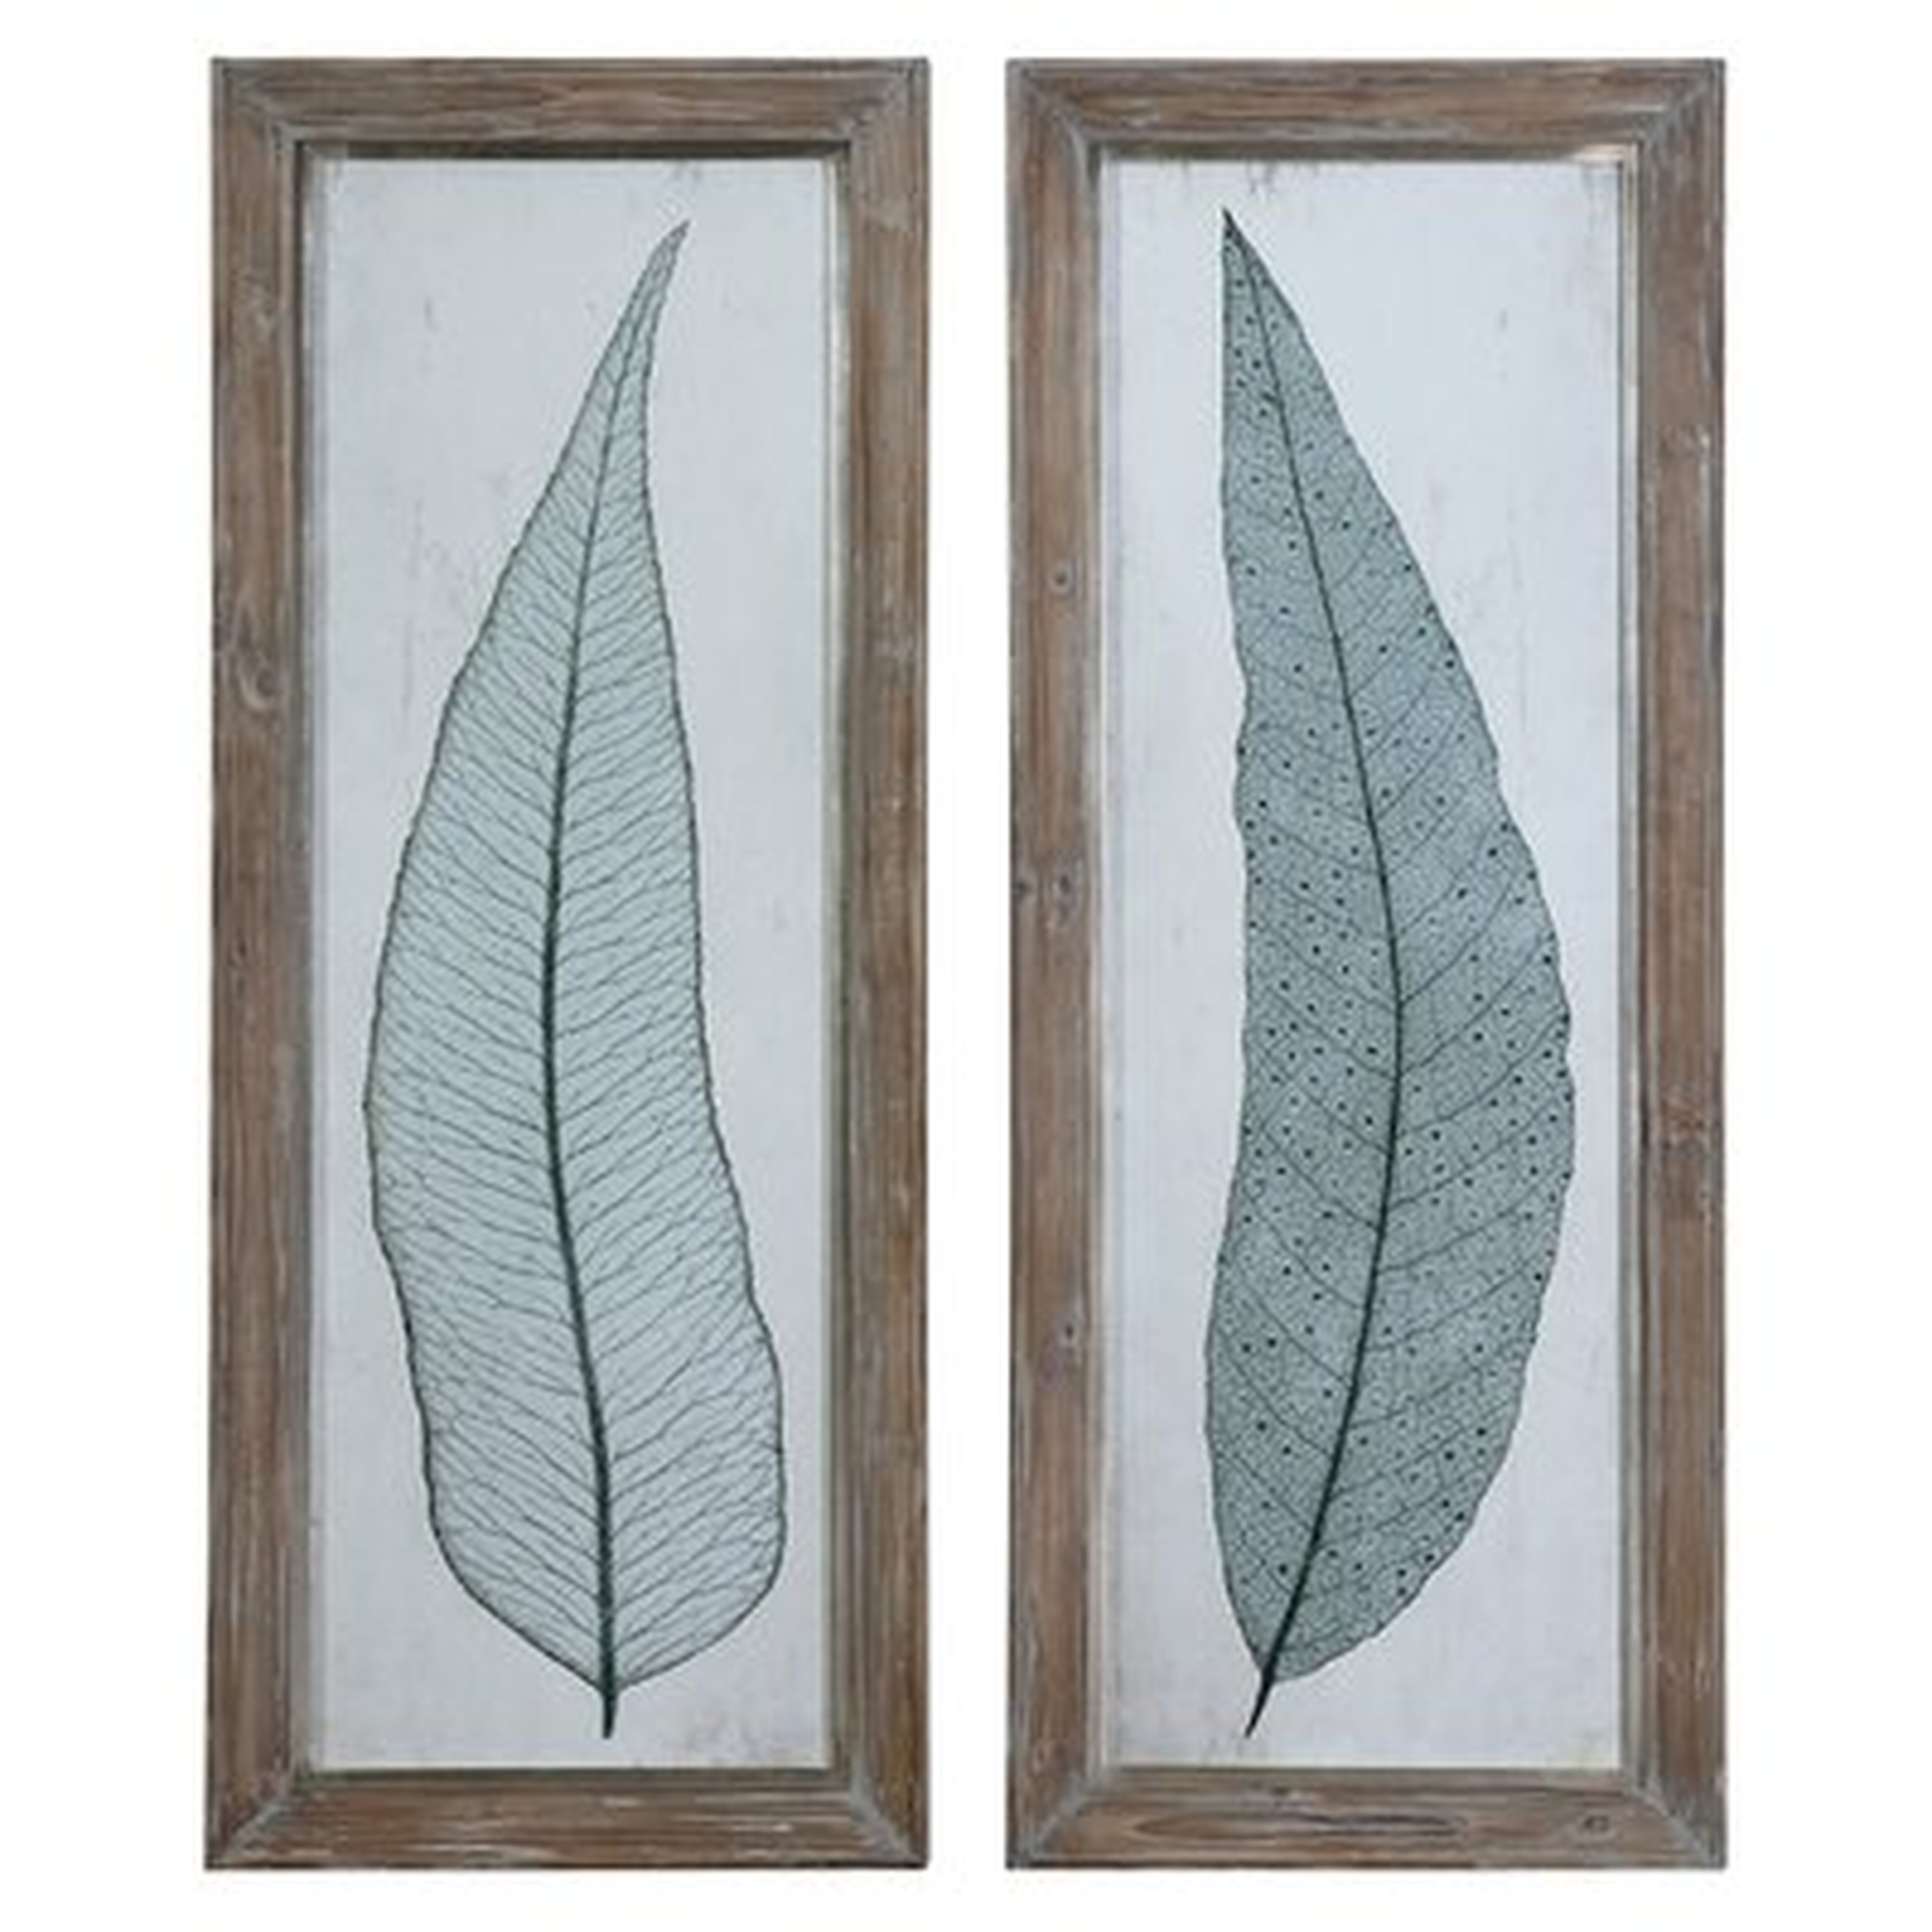 'Tall Leaves' 2 Piece Picture Frame Print Set - Birch Lane